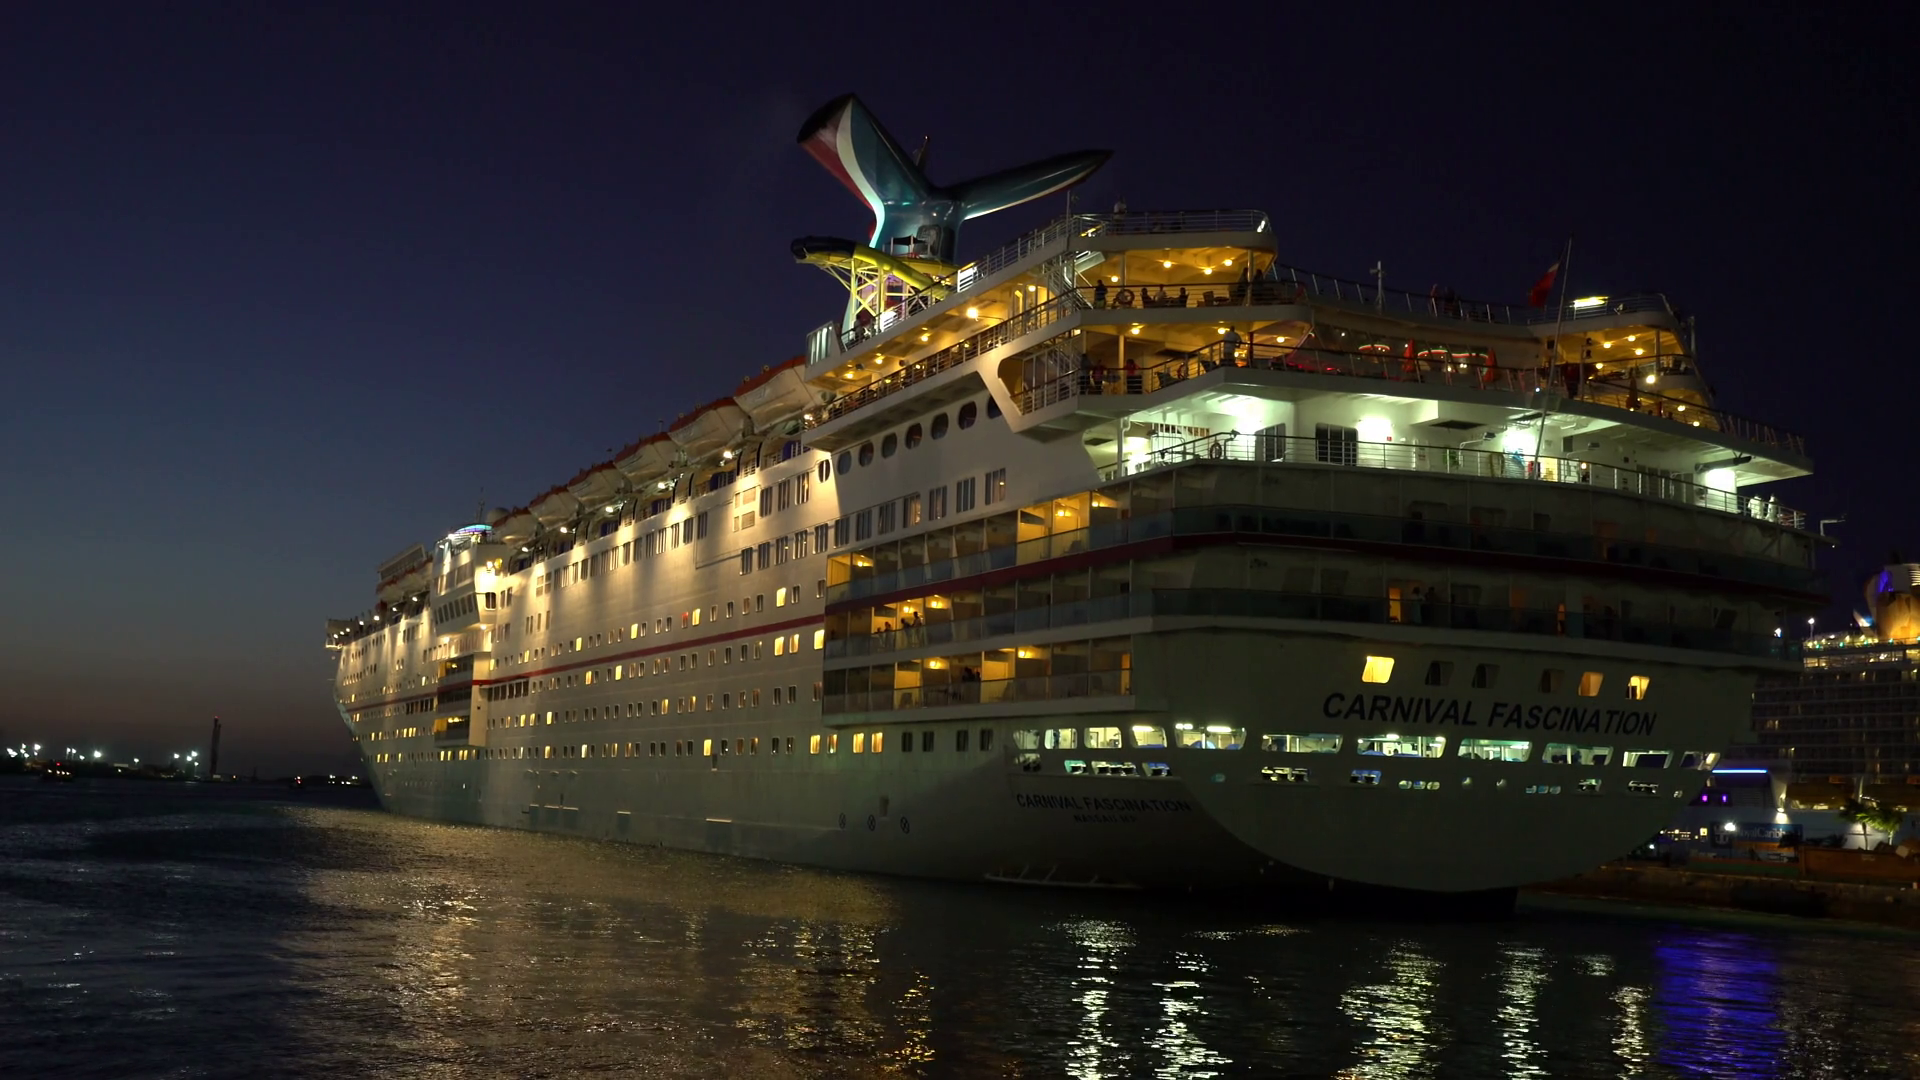 Illuminating cruise ship in the port at night - Anthem of the seas ...